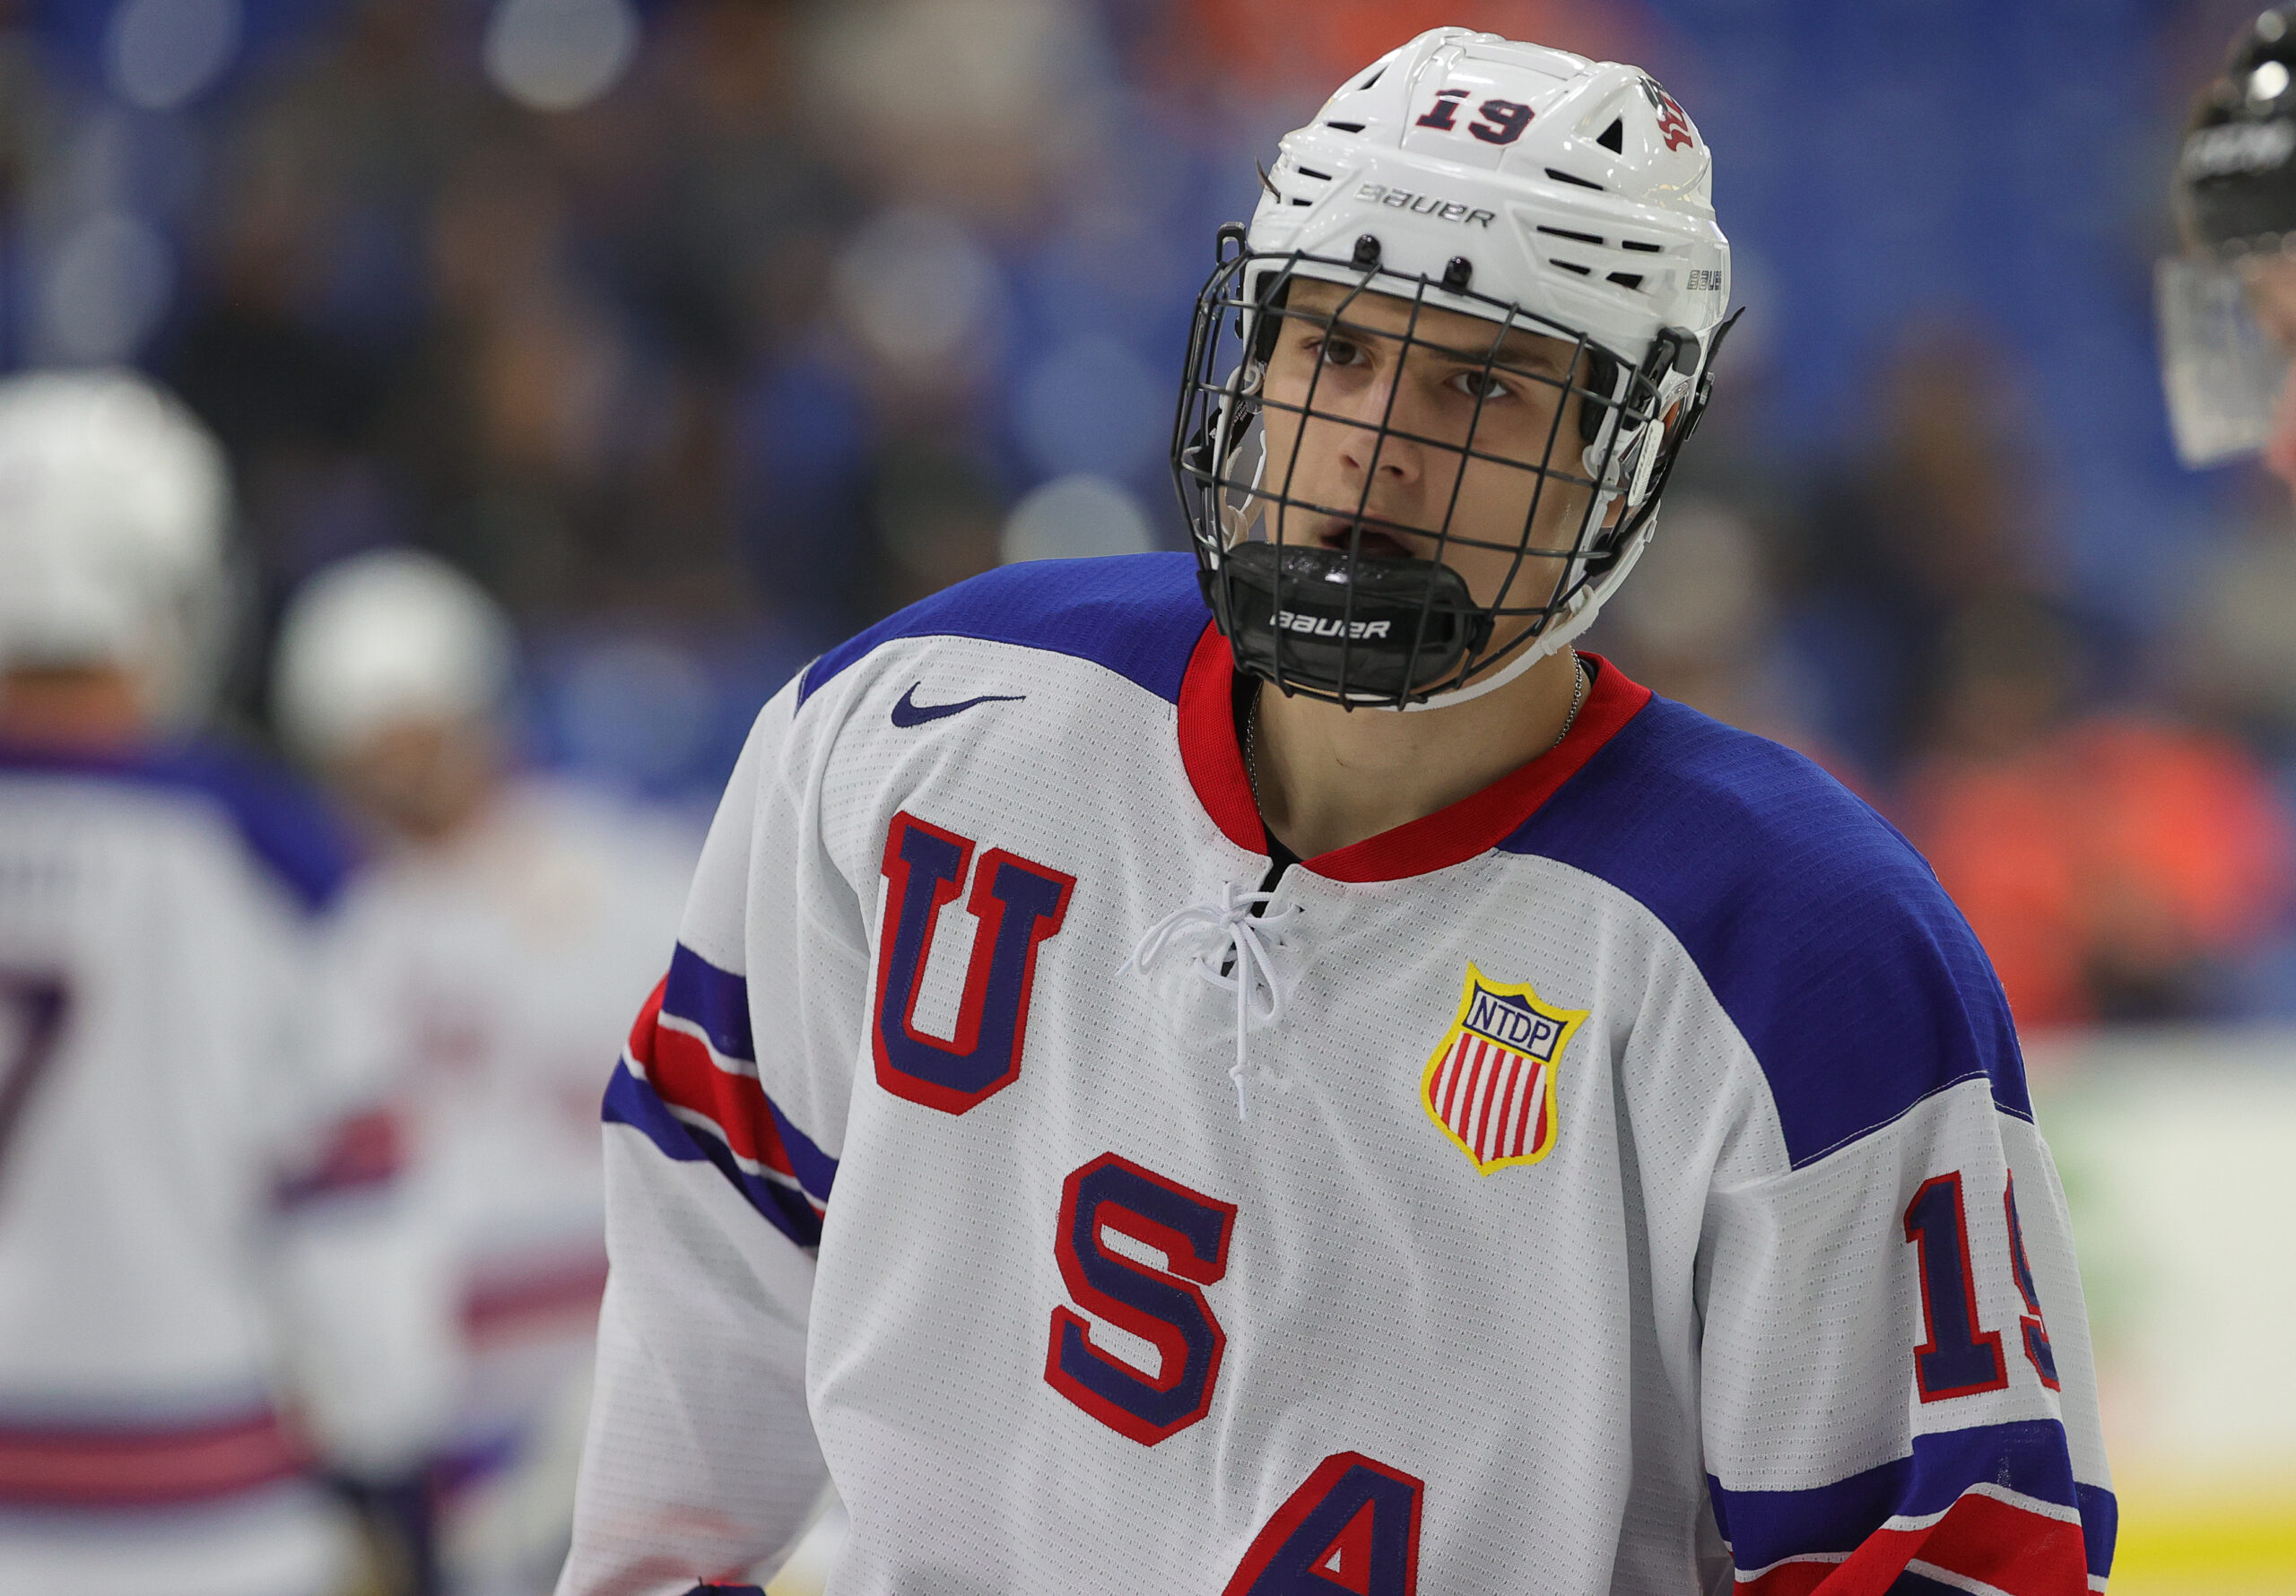 Flyers prospect Cam York named Team USA's player of game, but